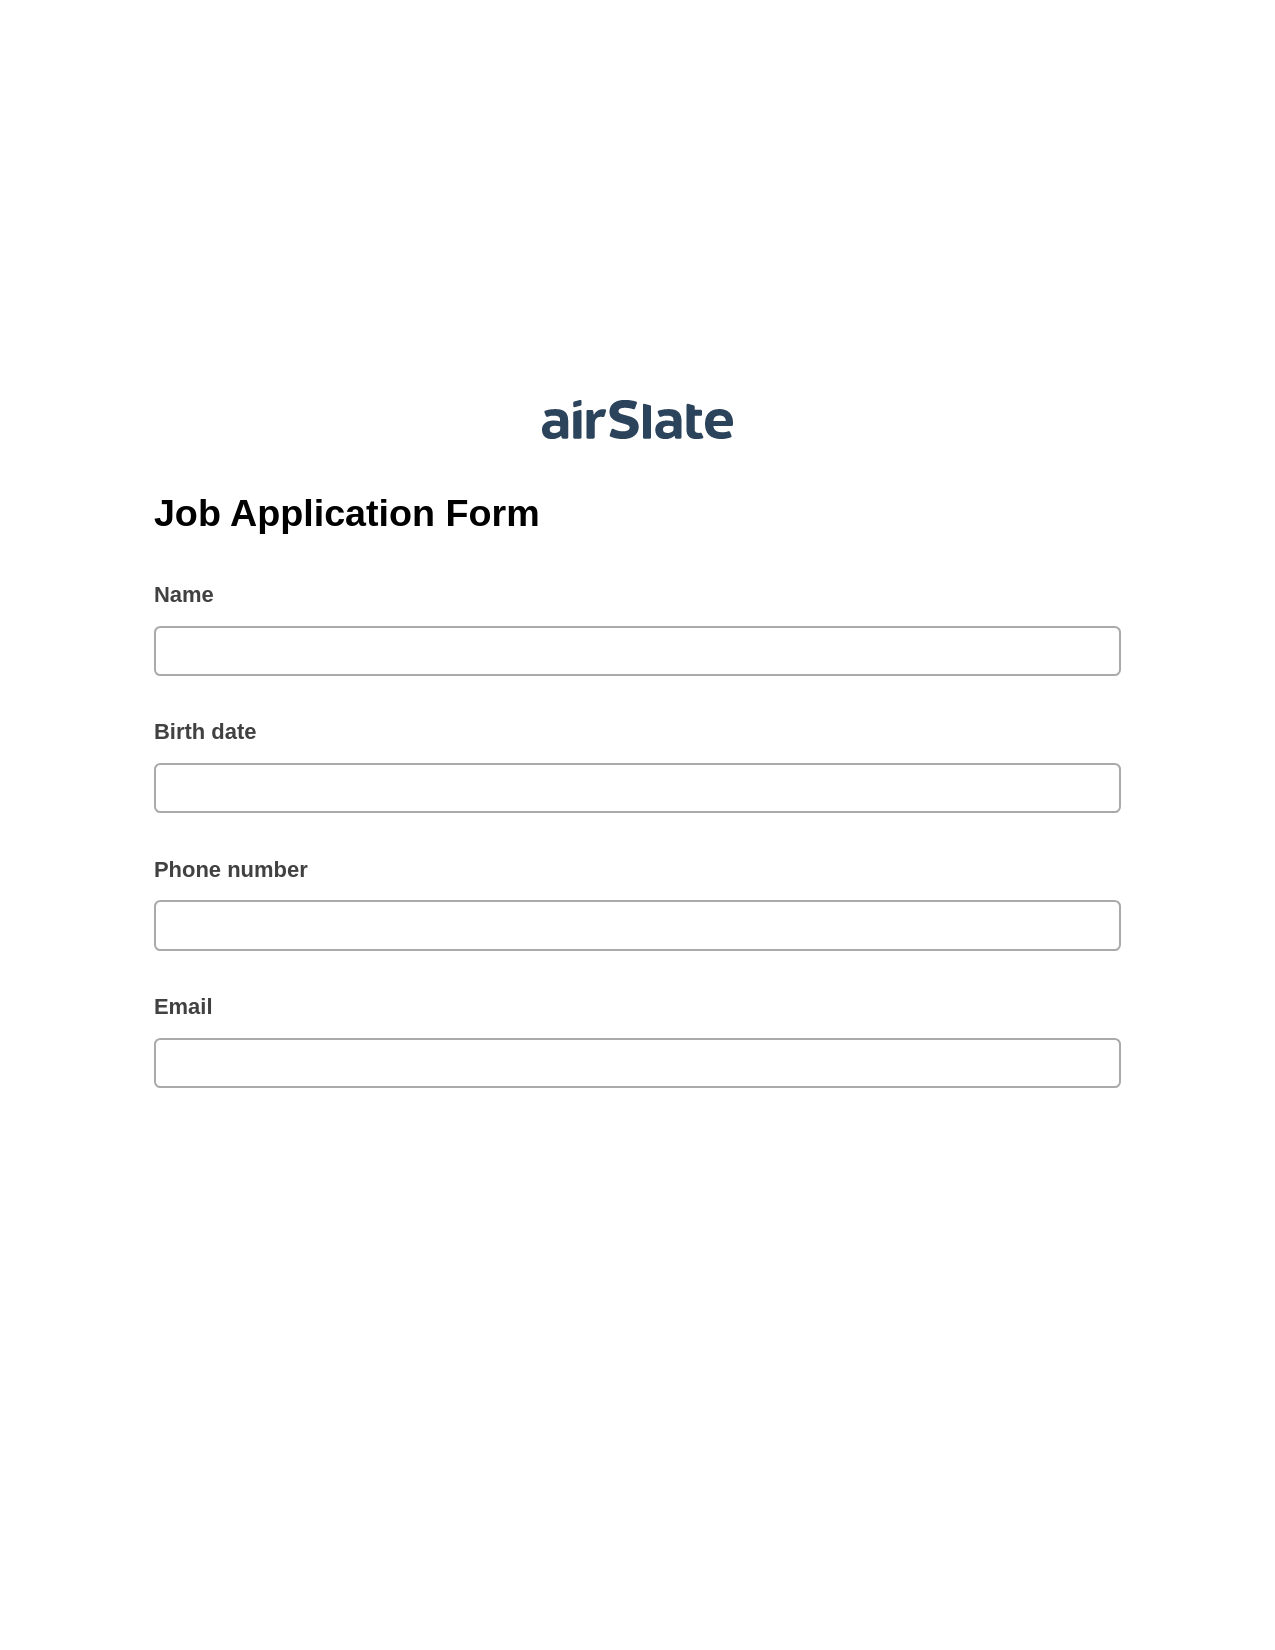 Multirole Job Application Form Pre-fill from Excel Spreadsheet Bot, In-person Signing Bot, Export to NetSuite Record Bot